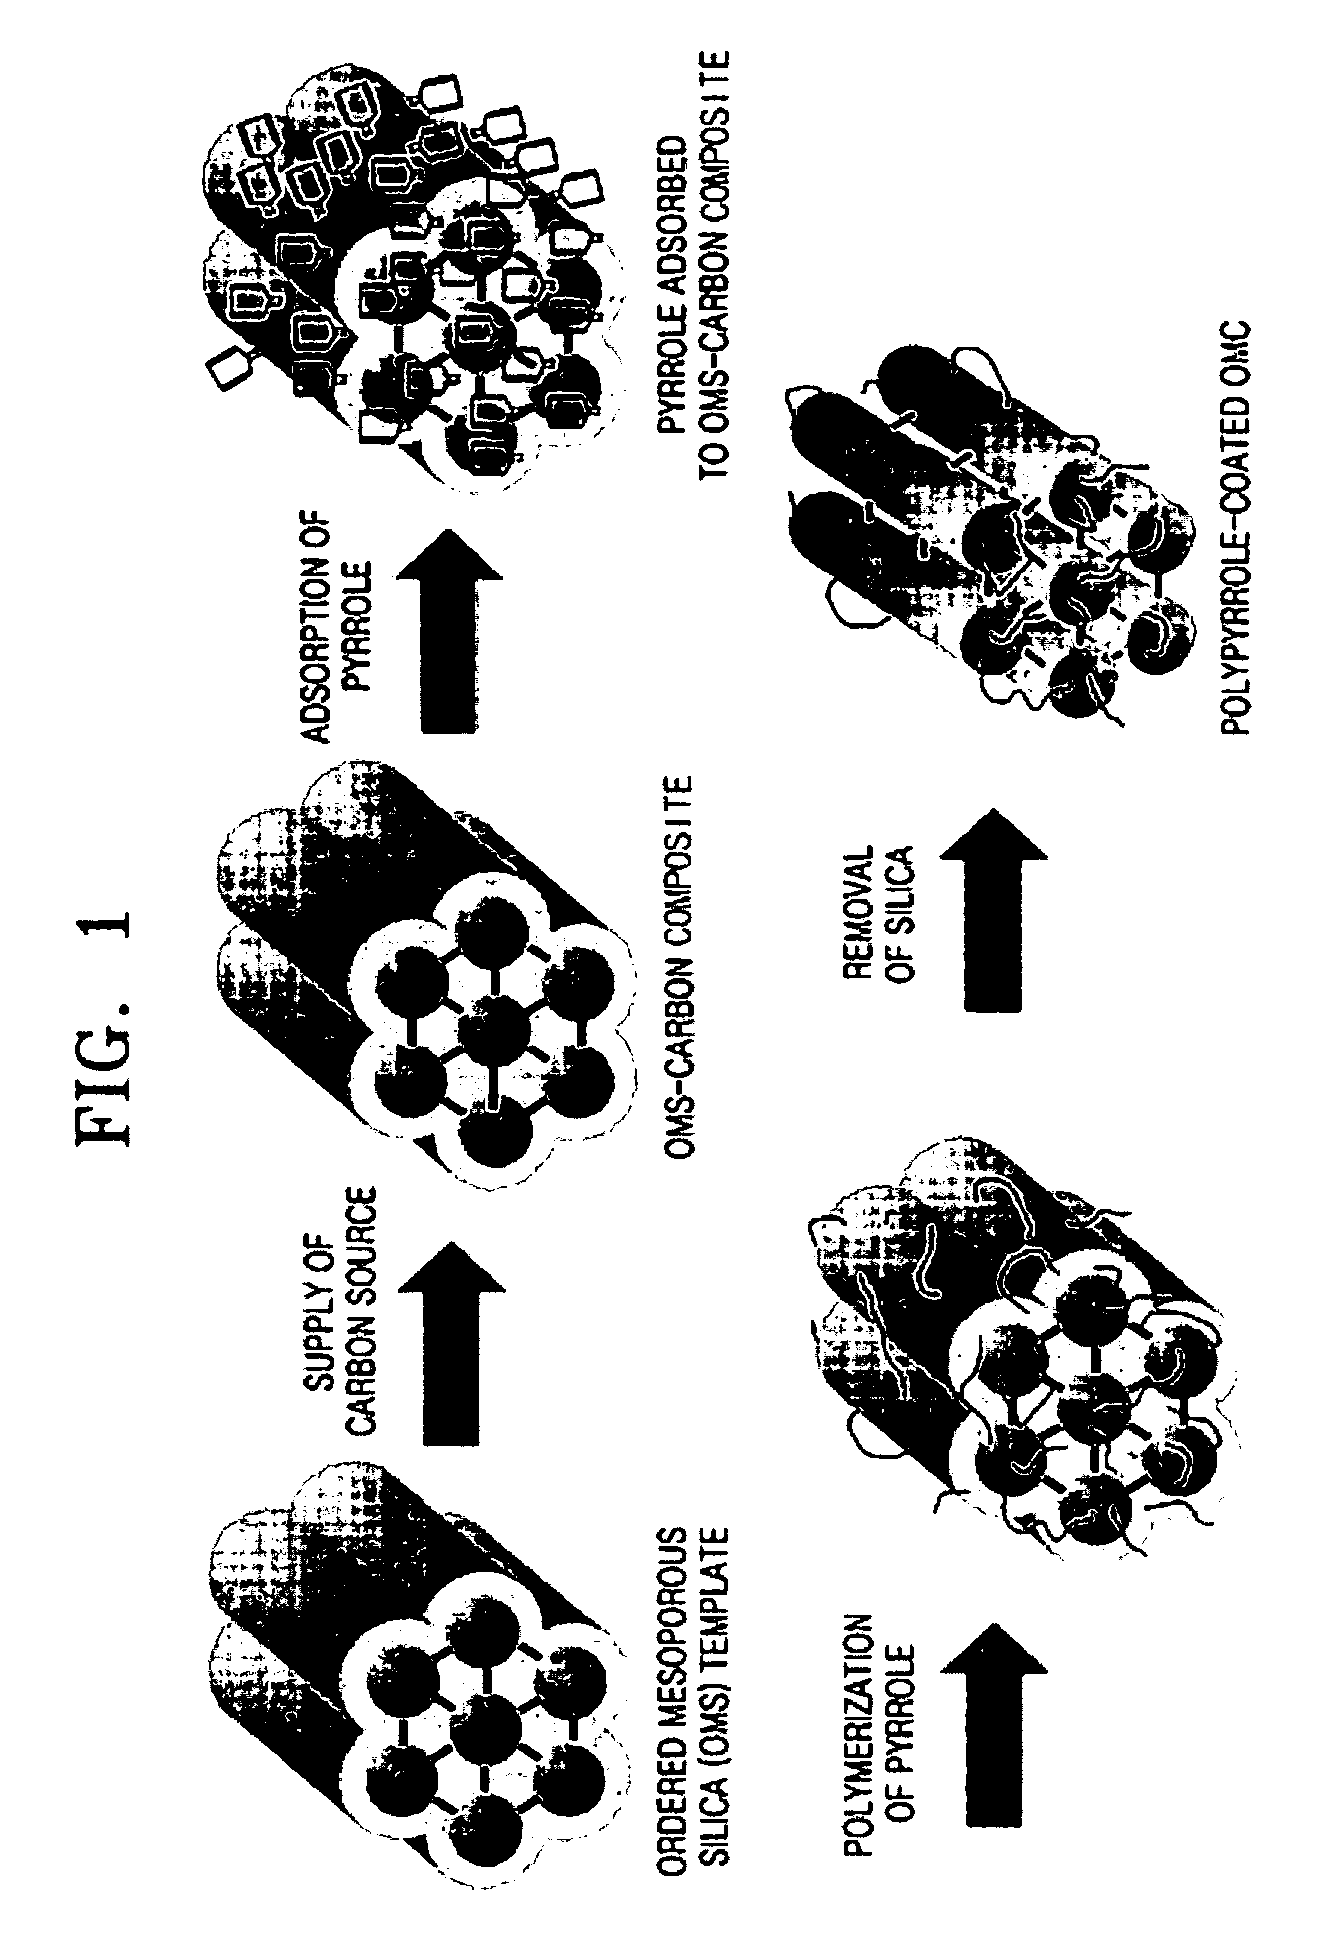 Mesoporous carbon composite, method of preparing the same, and fuel cell using the mesoporous carbon composite